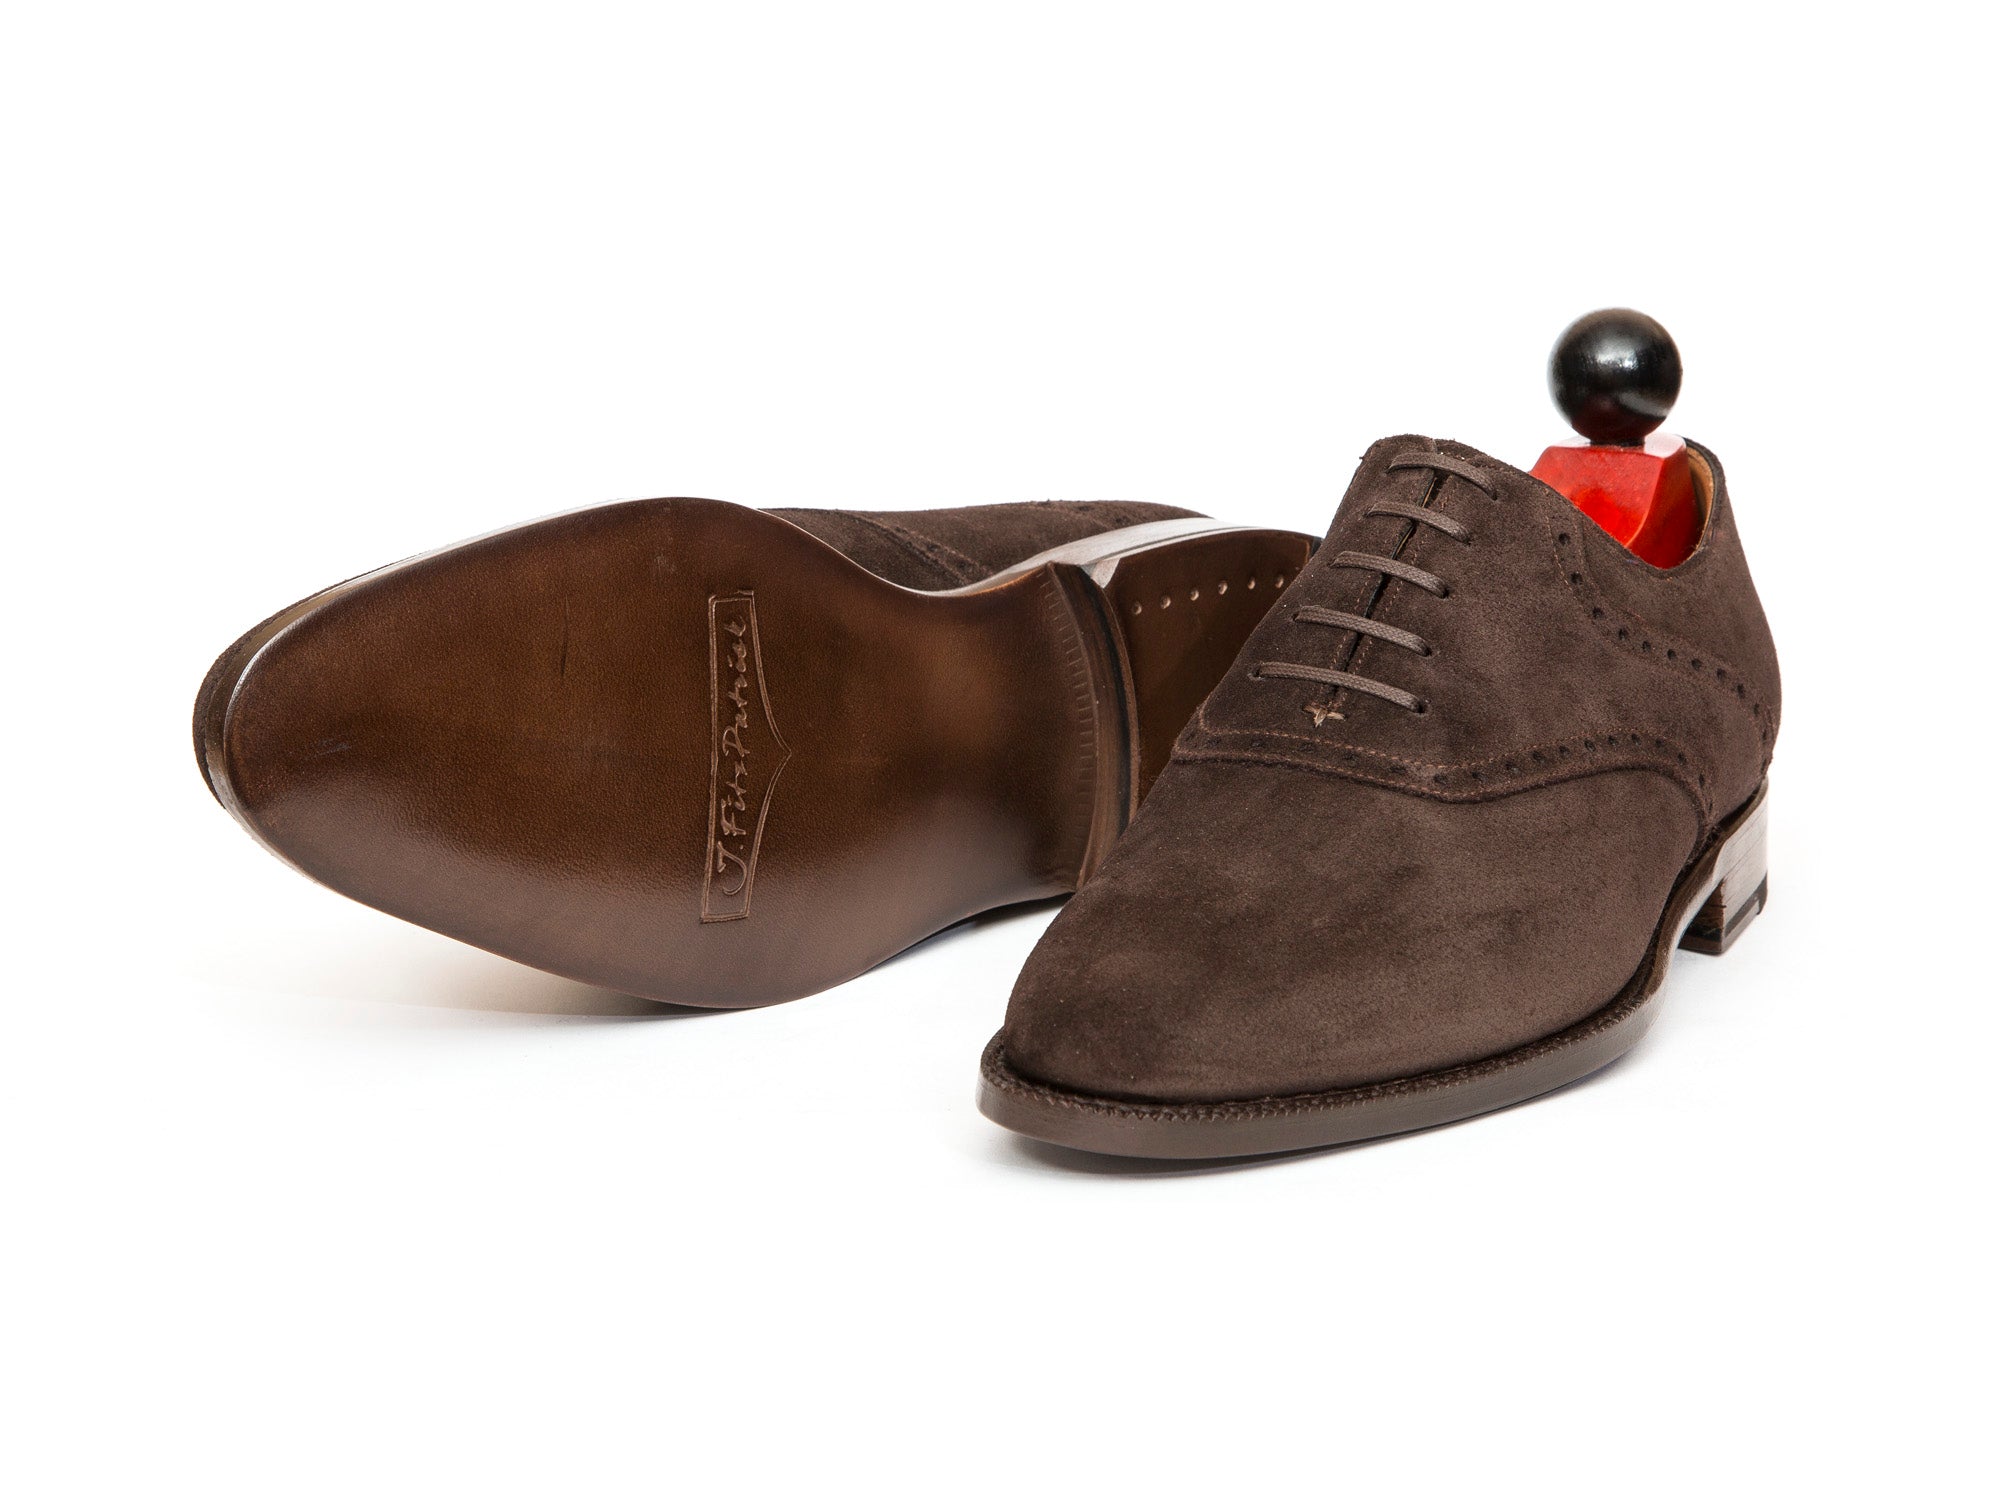 Stefano - MTO - Bitter Chocolate Suede - JKF Last - Single Leather Sole